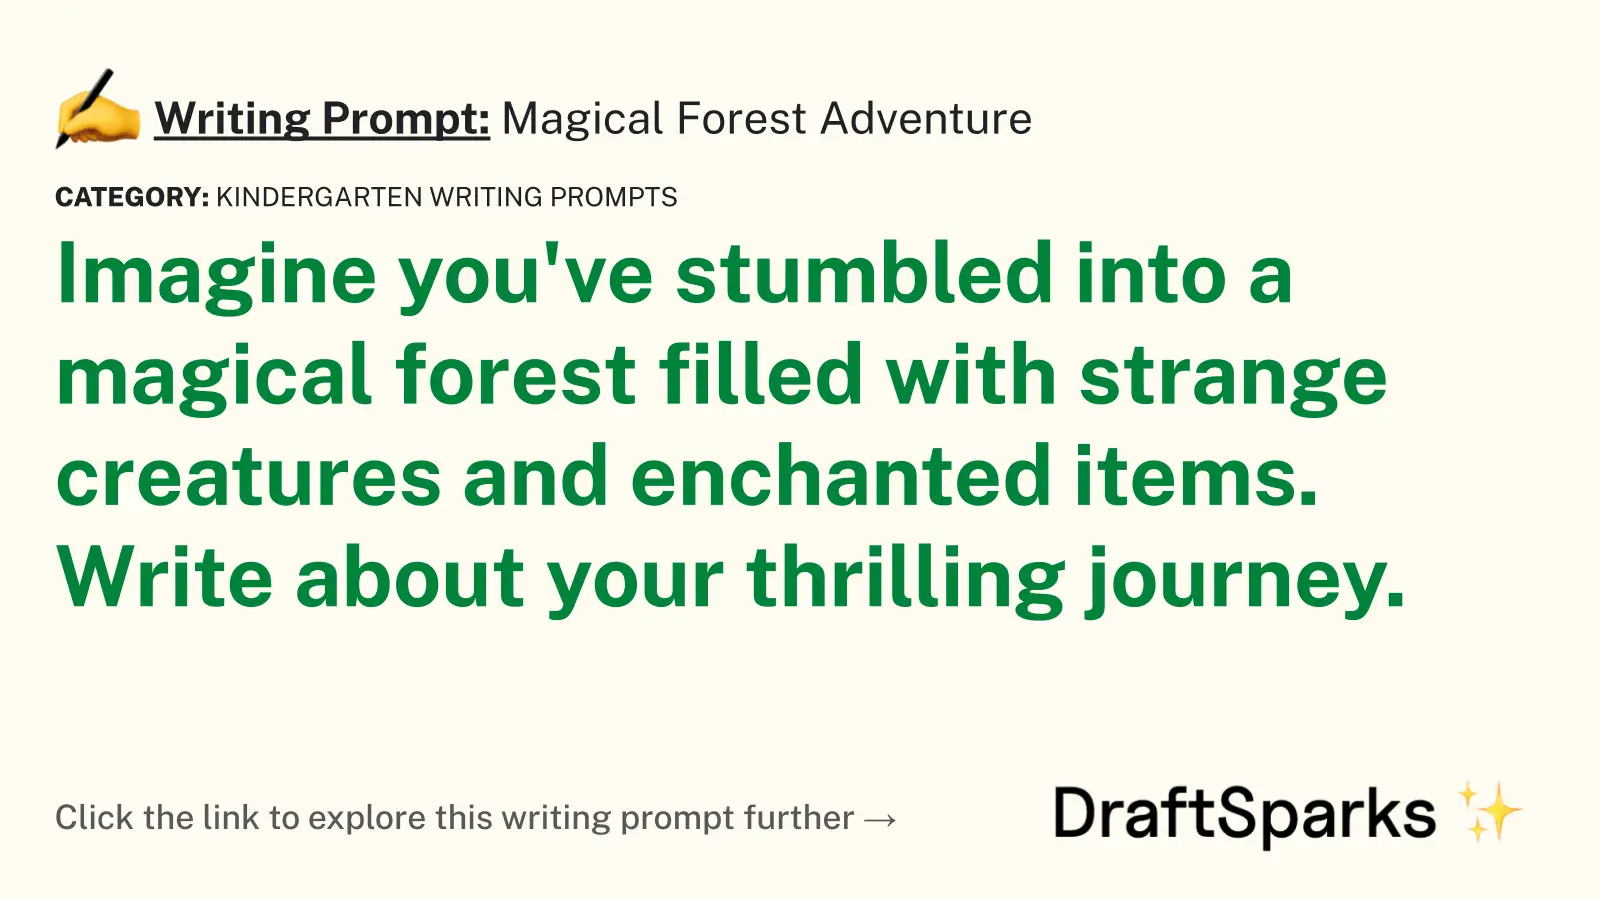 Magical Forest Adventure